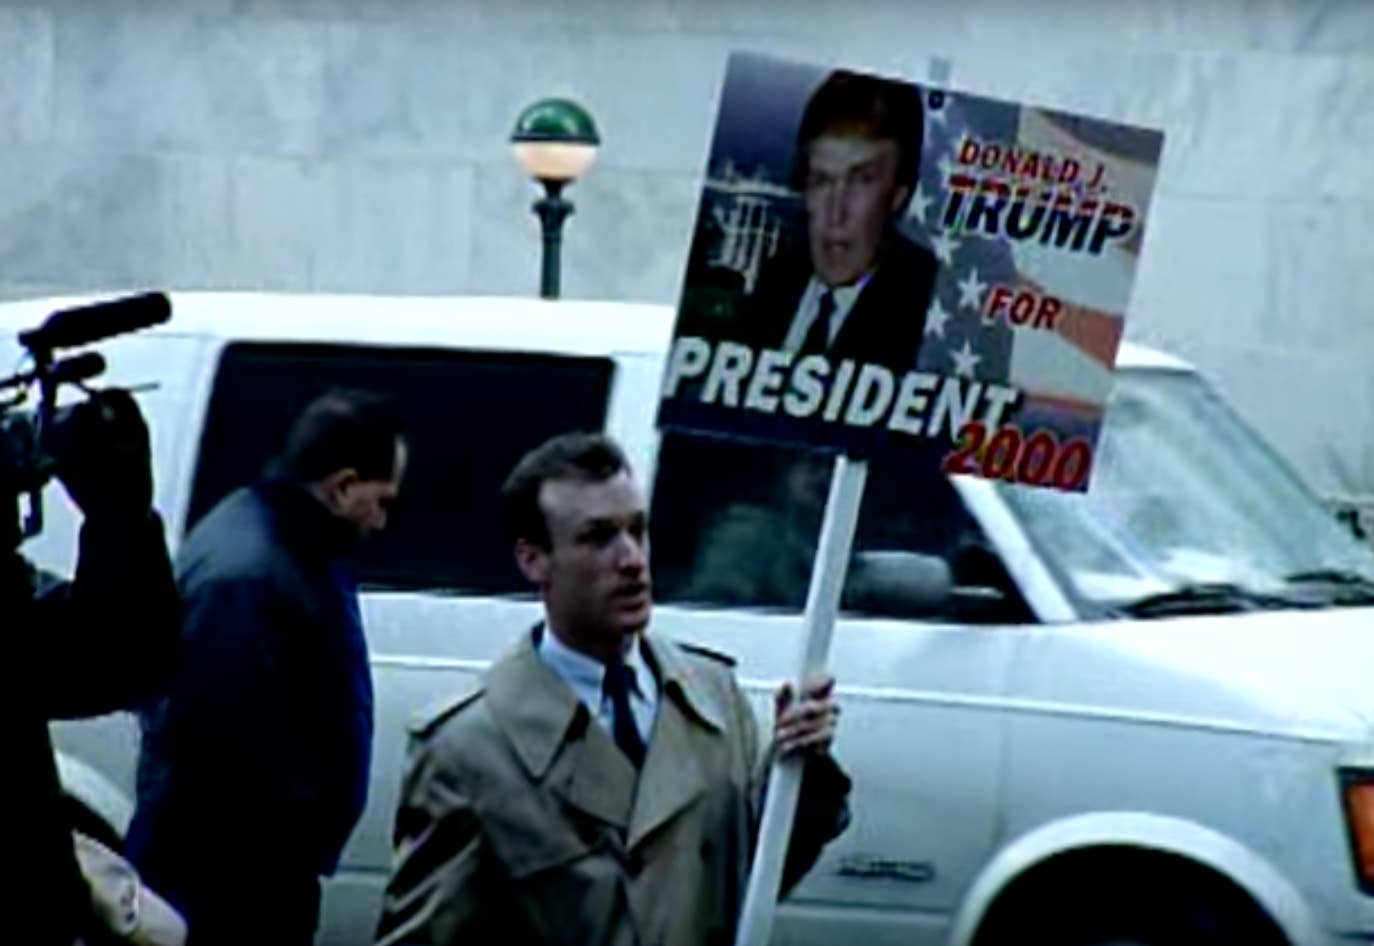 This Rage Against The Machine Video From 1999 Features a 